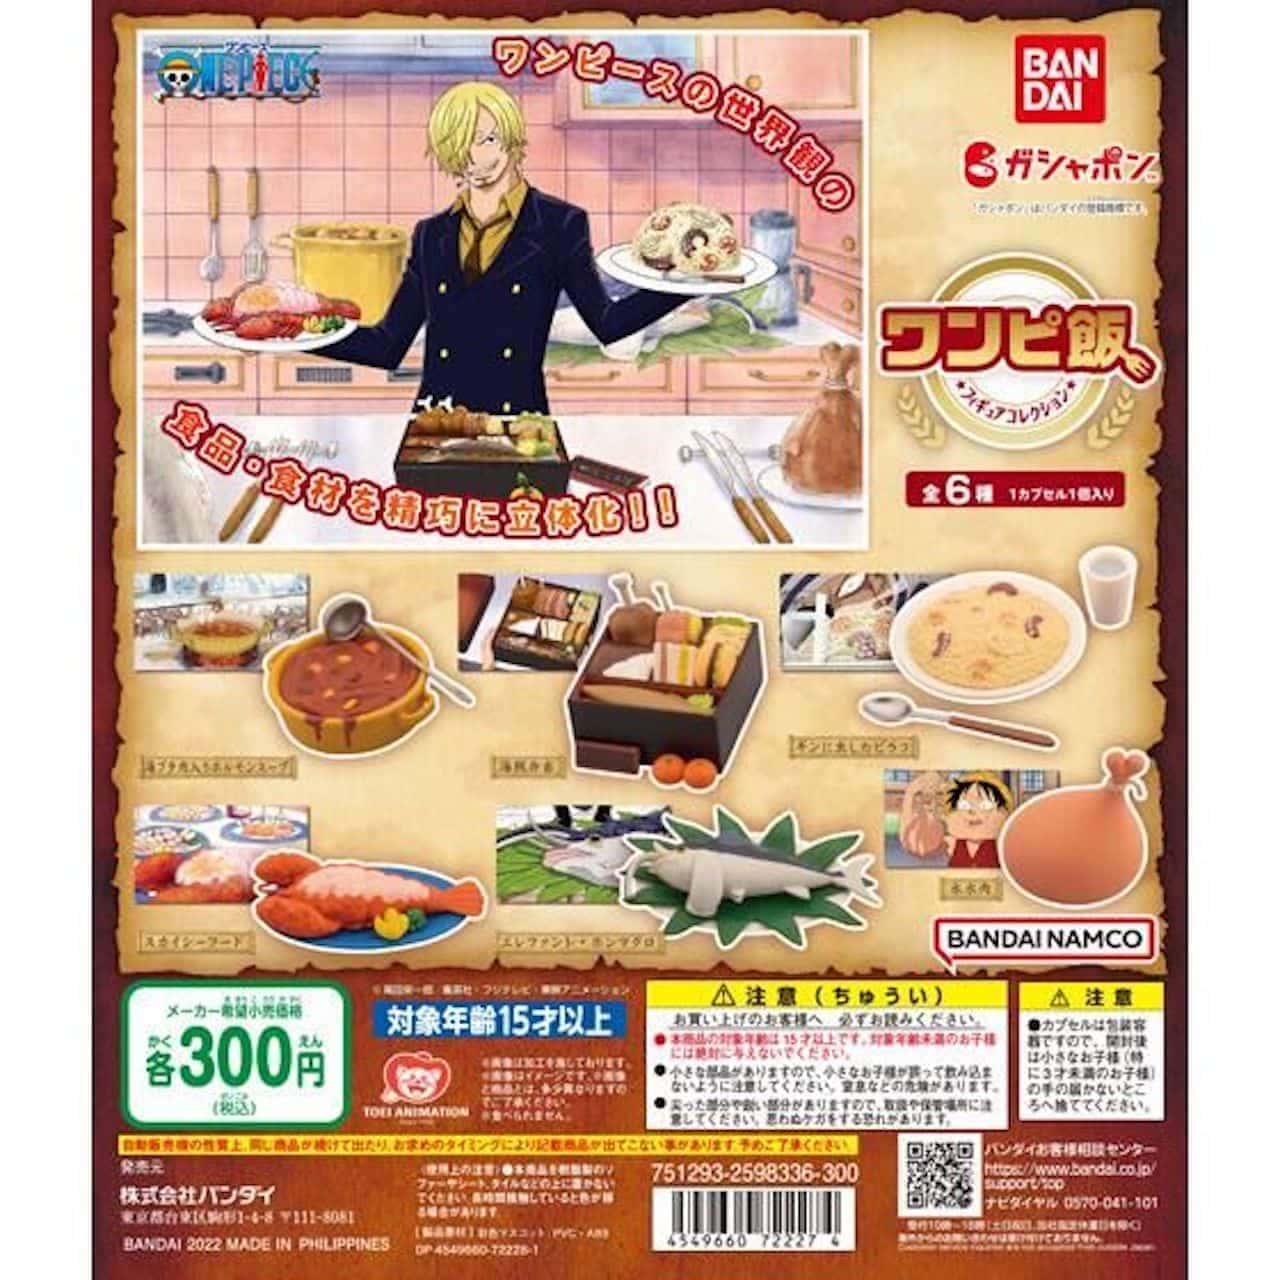 One Piece Meal Figure Collection" from Bandai